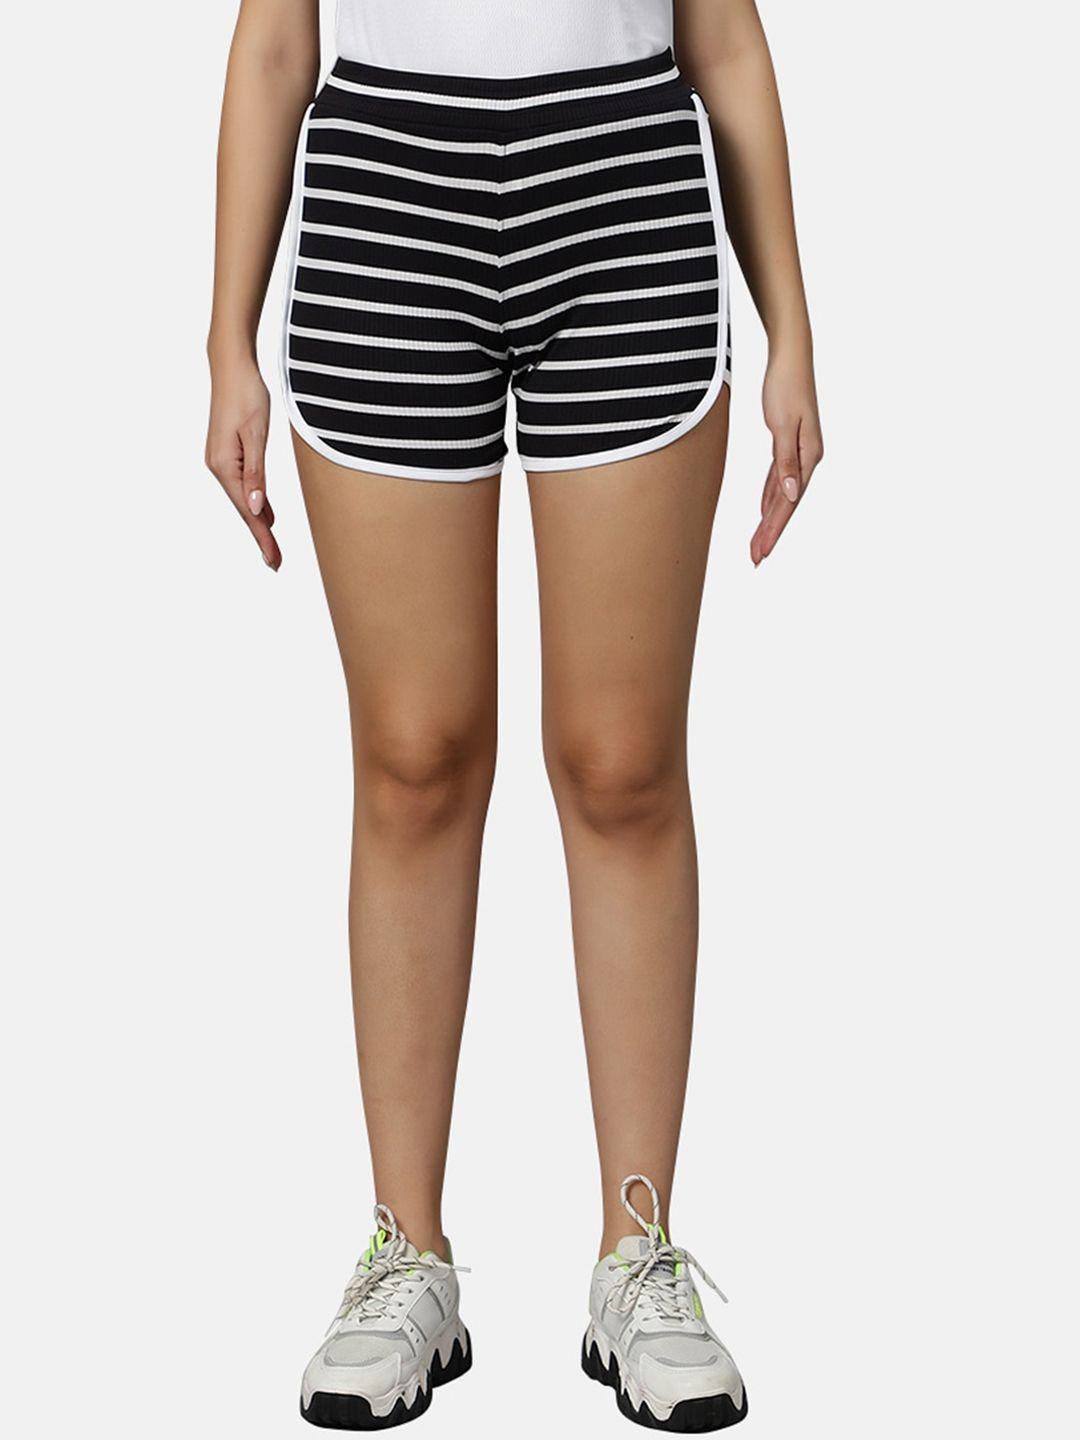 omtex-women-black-striped-outdoor-with-technology-shorts